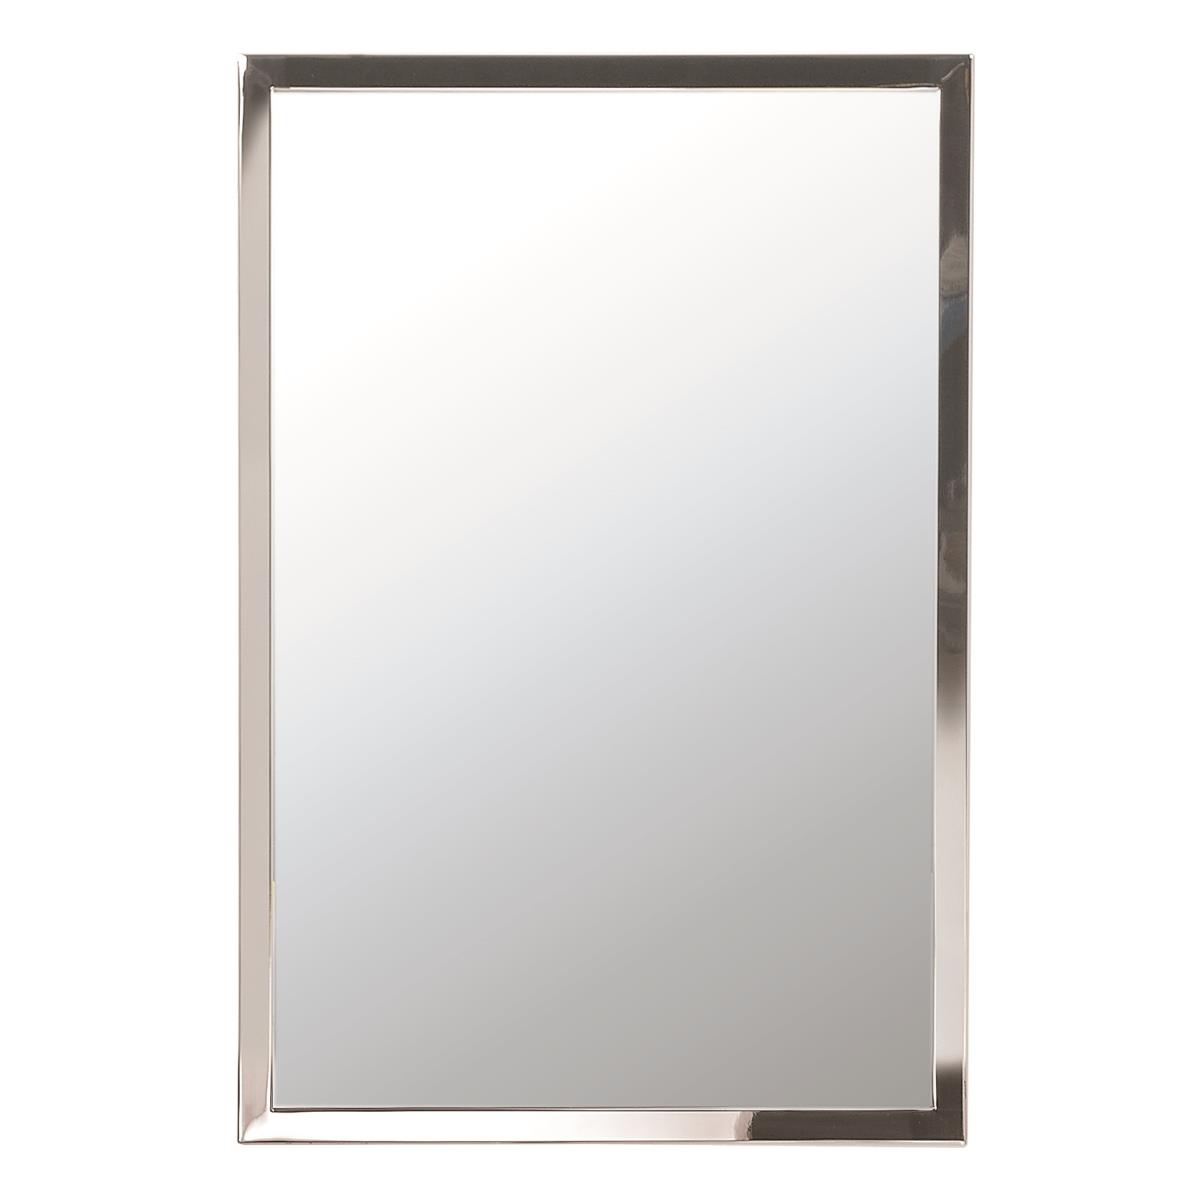 24 X 30 In. Urban Rectangle Wall Mirror With 1 In. Frame - Polished Stainless Steel